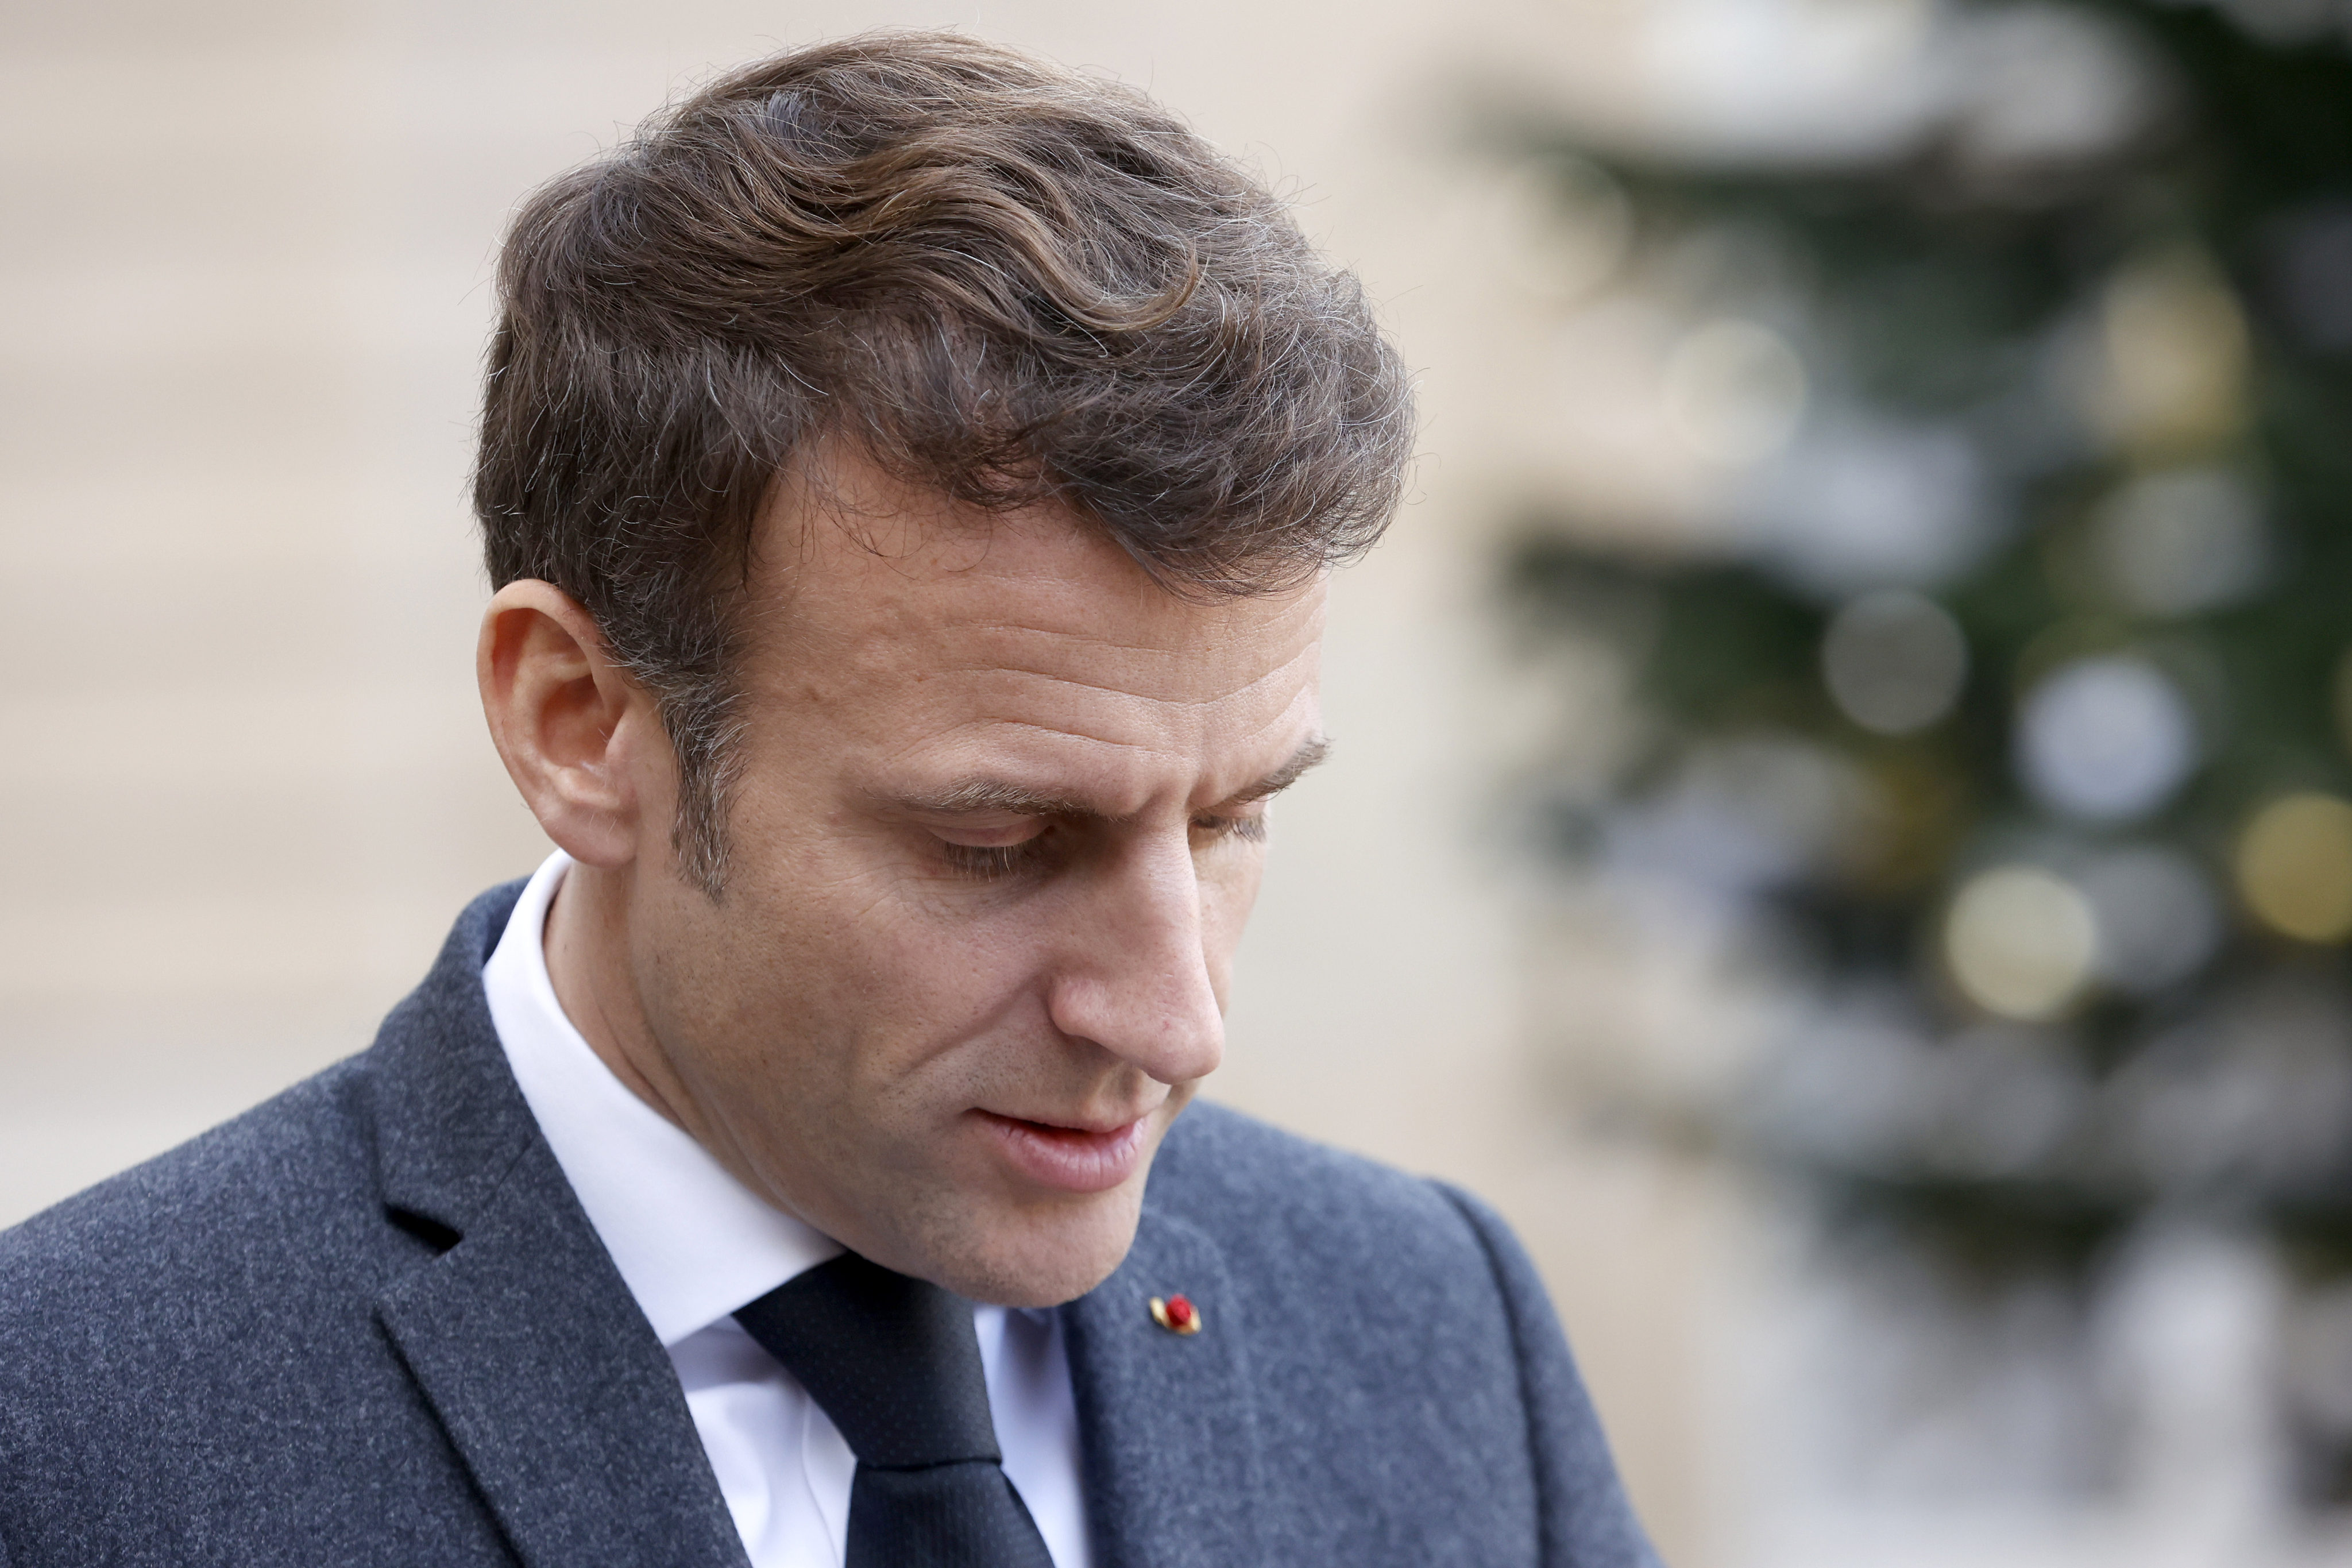 France’s President Emmanuel Macron talks to the press at the Elysee presidential palace on January 3 in Paris. Photo: Getty Images